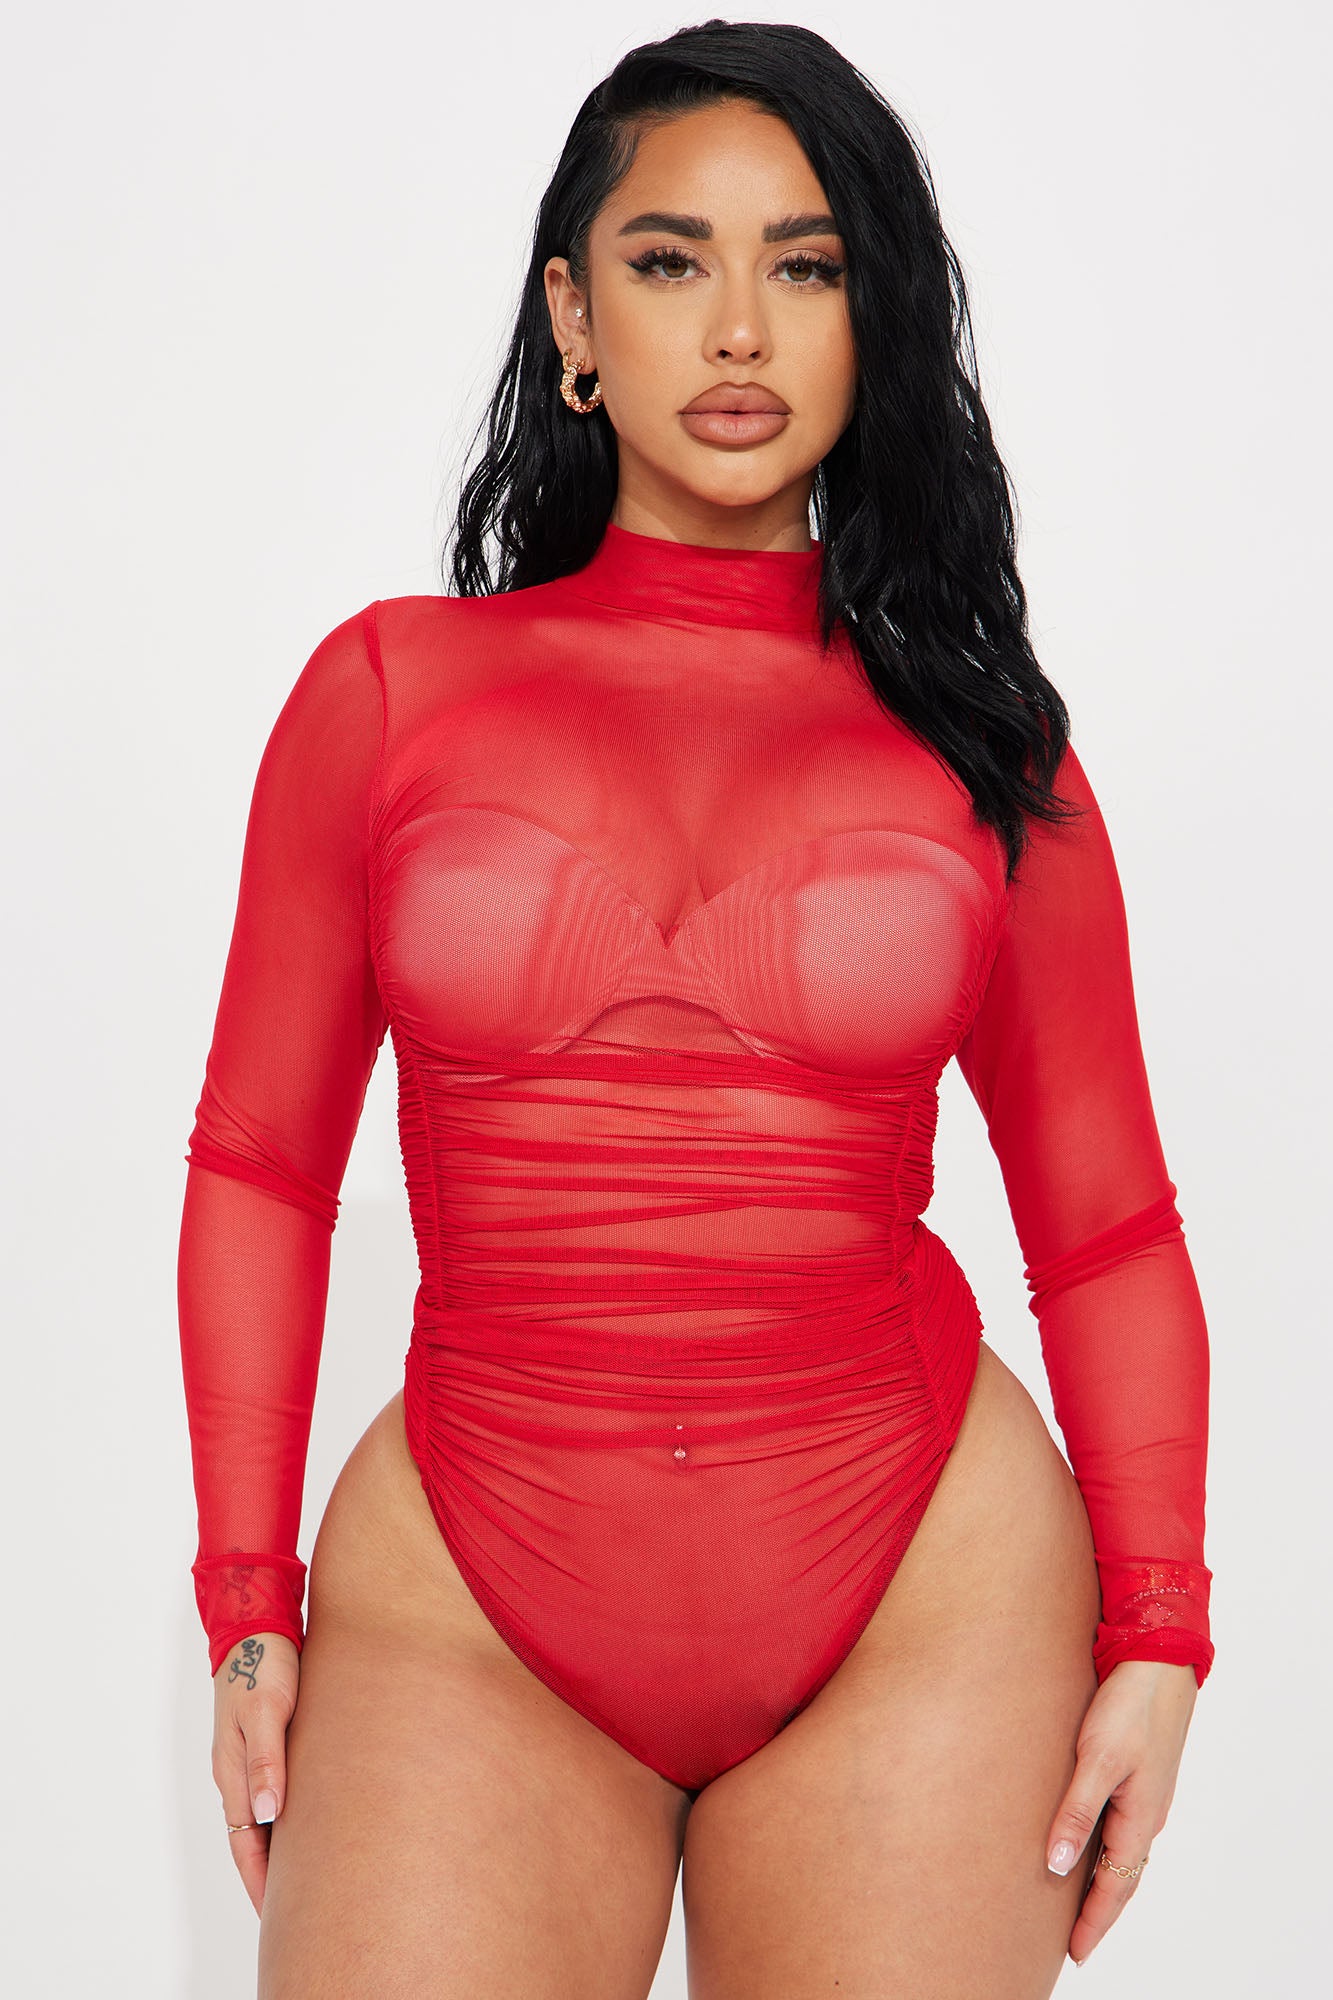 Obsessed with sheer bodysuits  Sheer bodysuit outfit, Sheer shirt